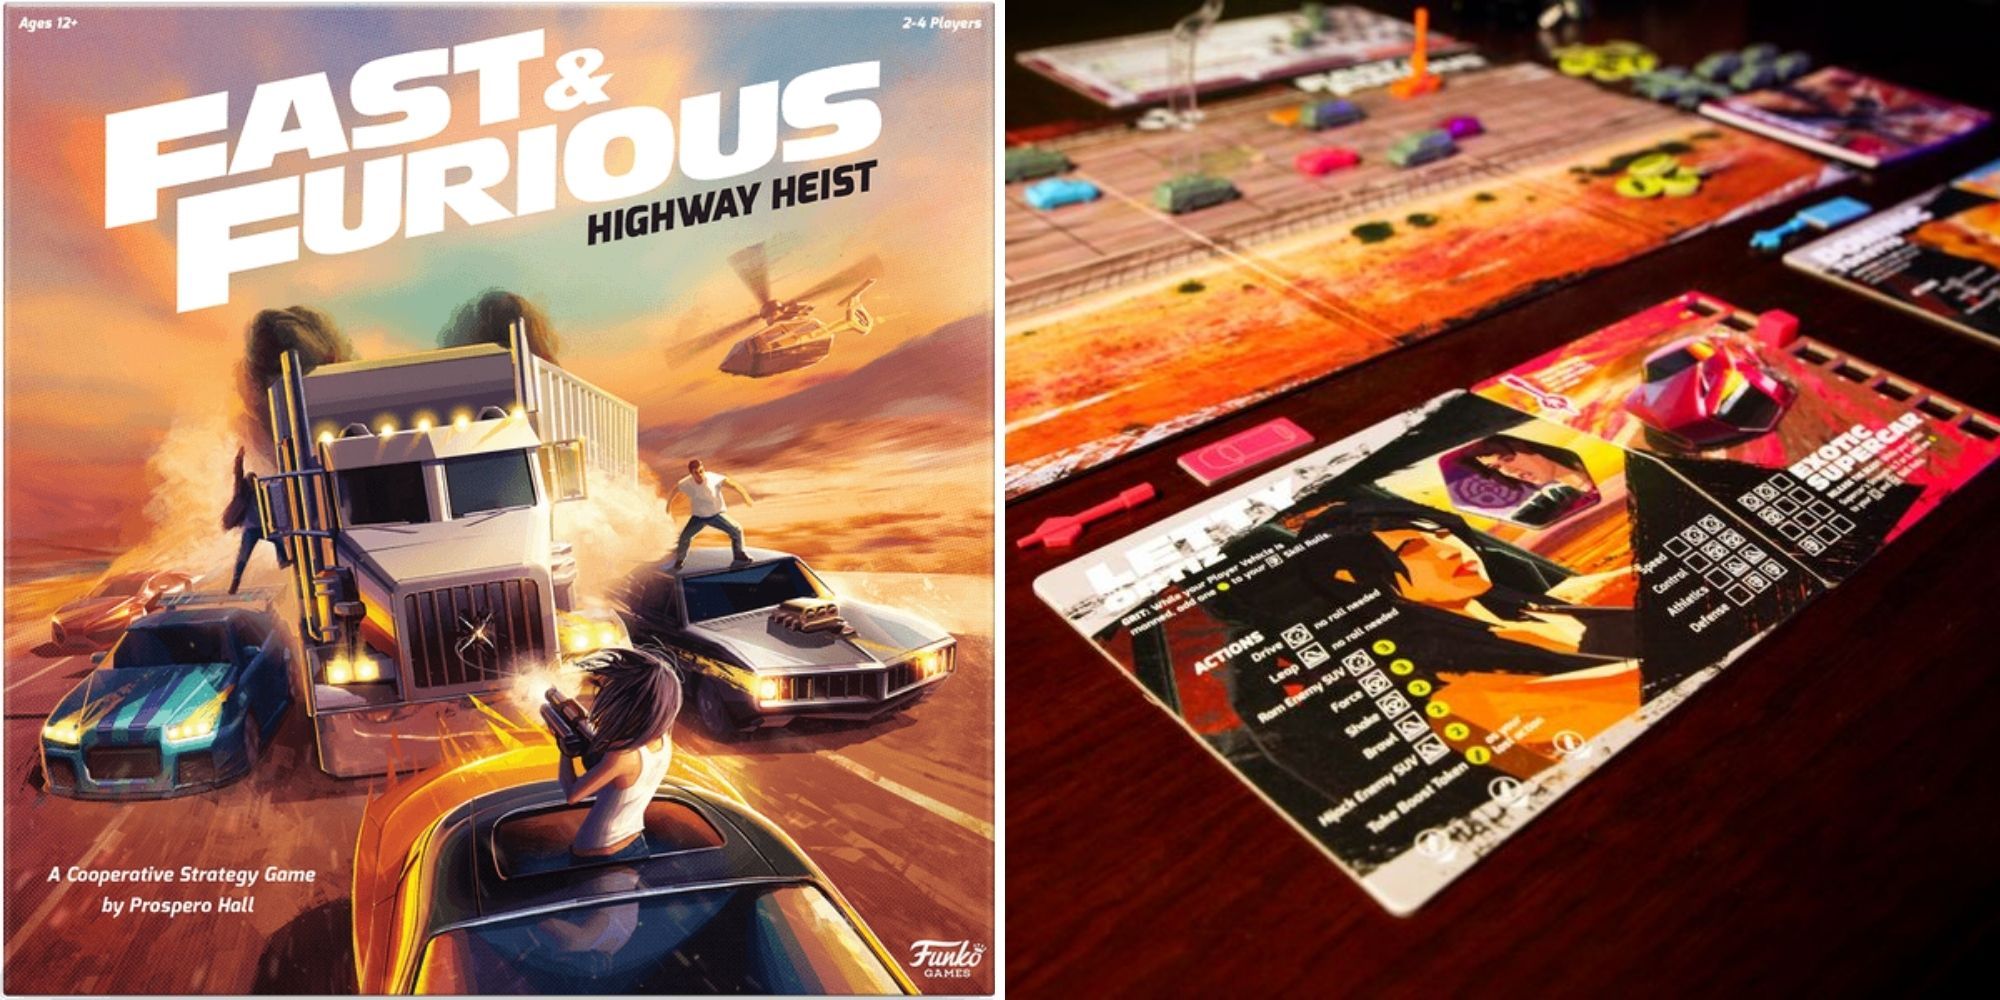 Fast & Furious Highway Heist game box on left, game set up on right